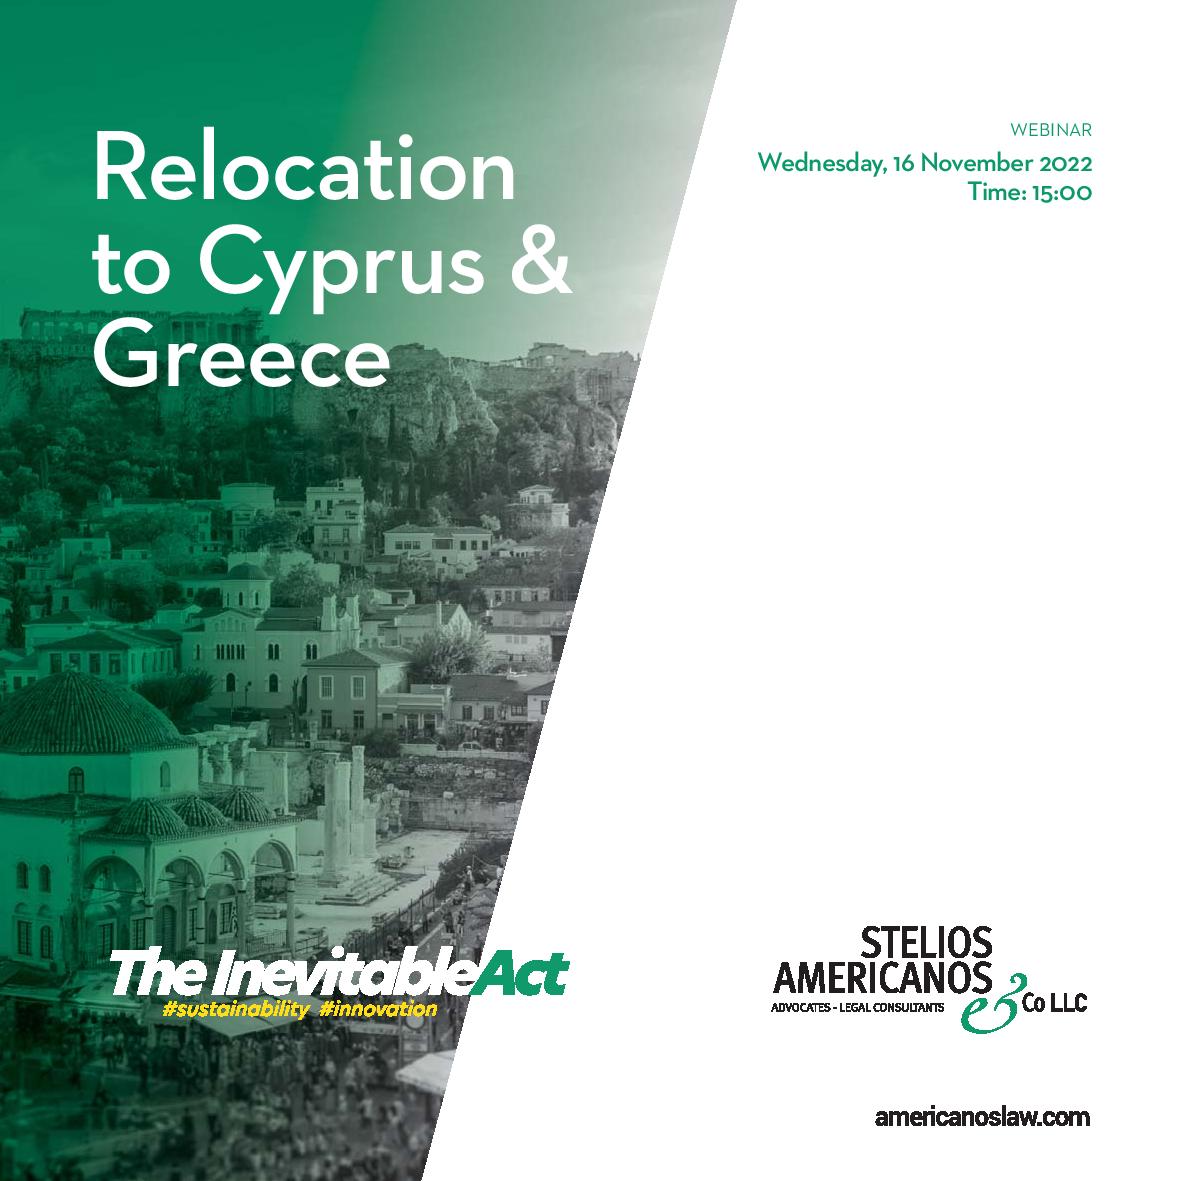 Webinar for Relocation to Cyprus & Greece